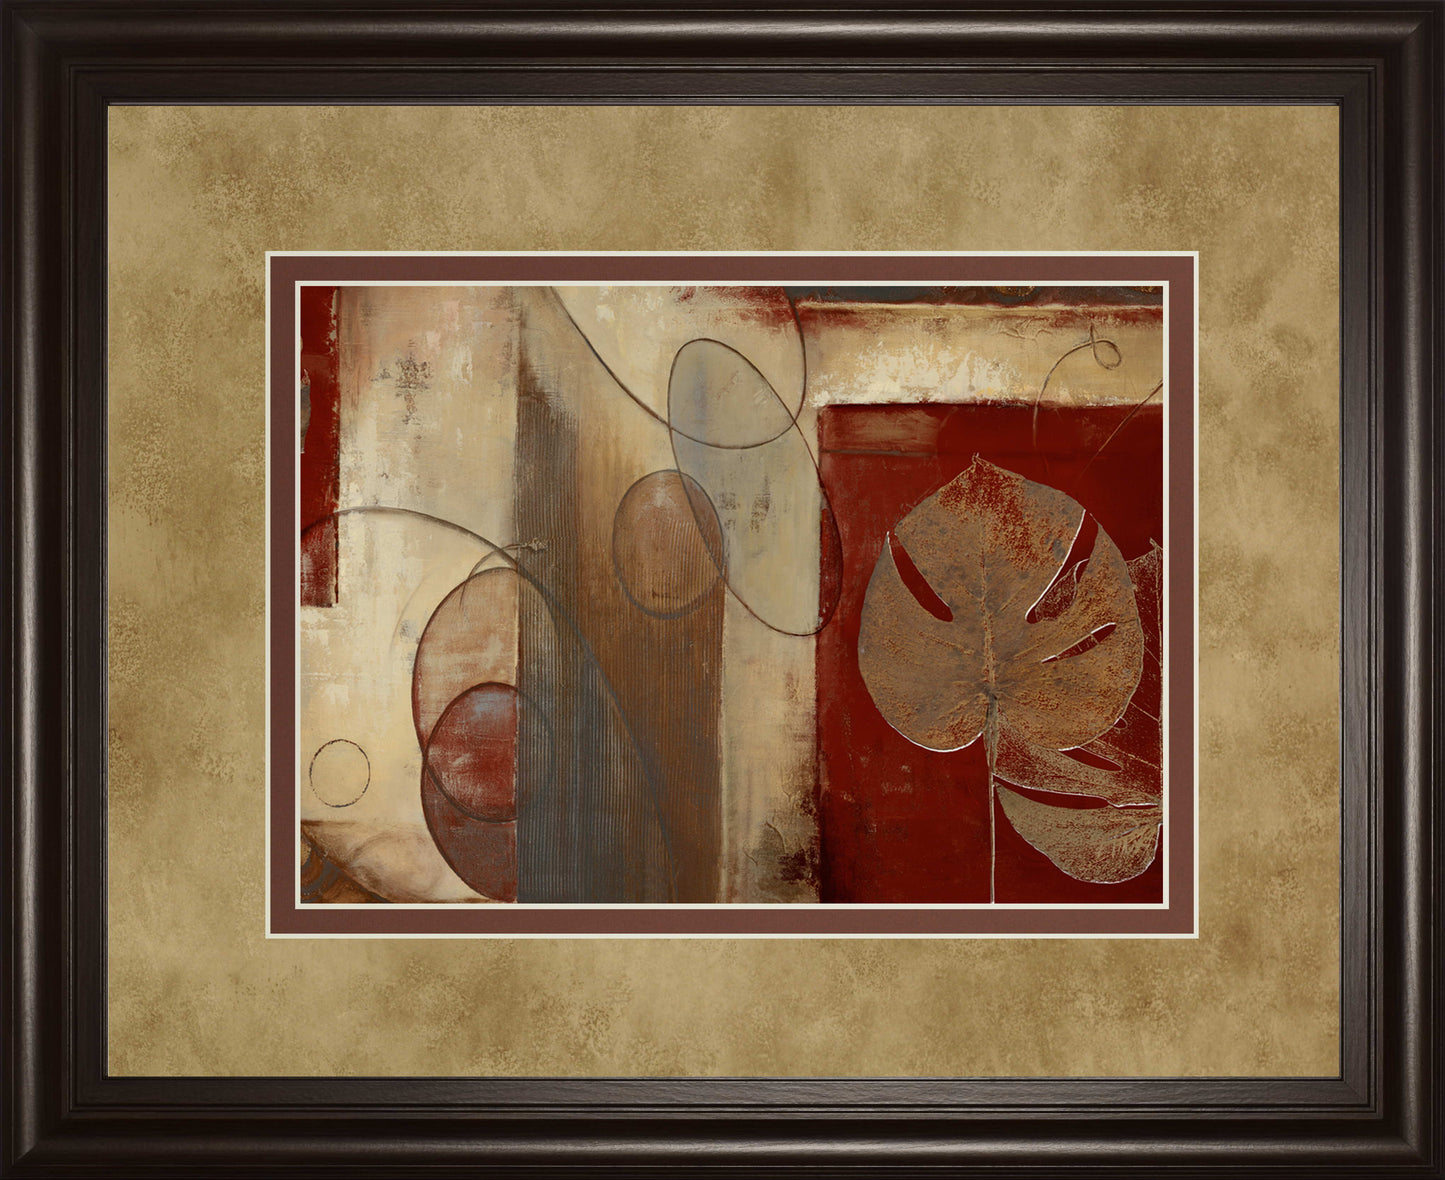 Inspiration In Crimson By Patricia Pinto - Framed Print Wall Art - Red